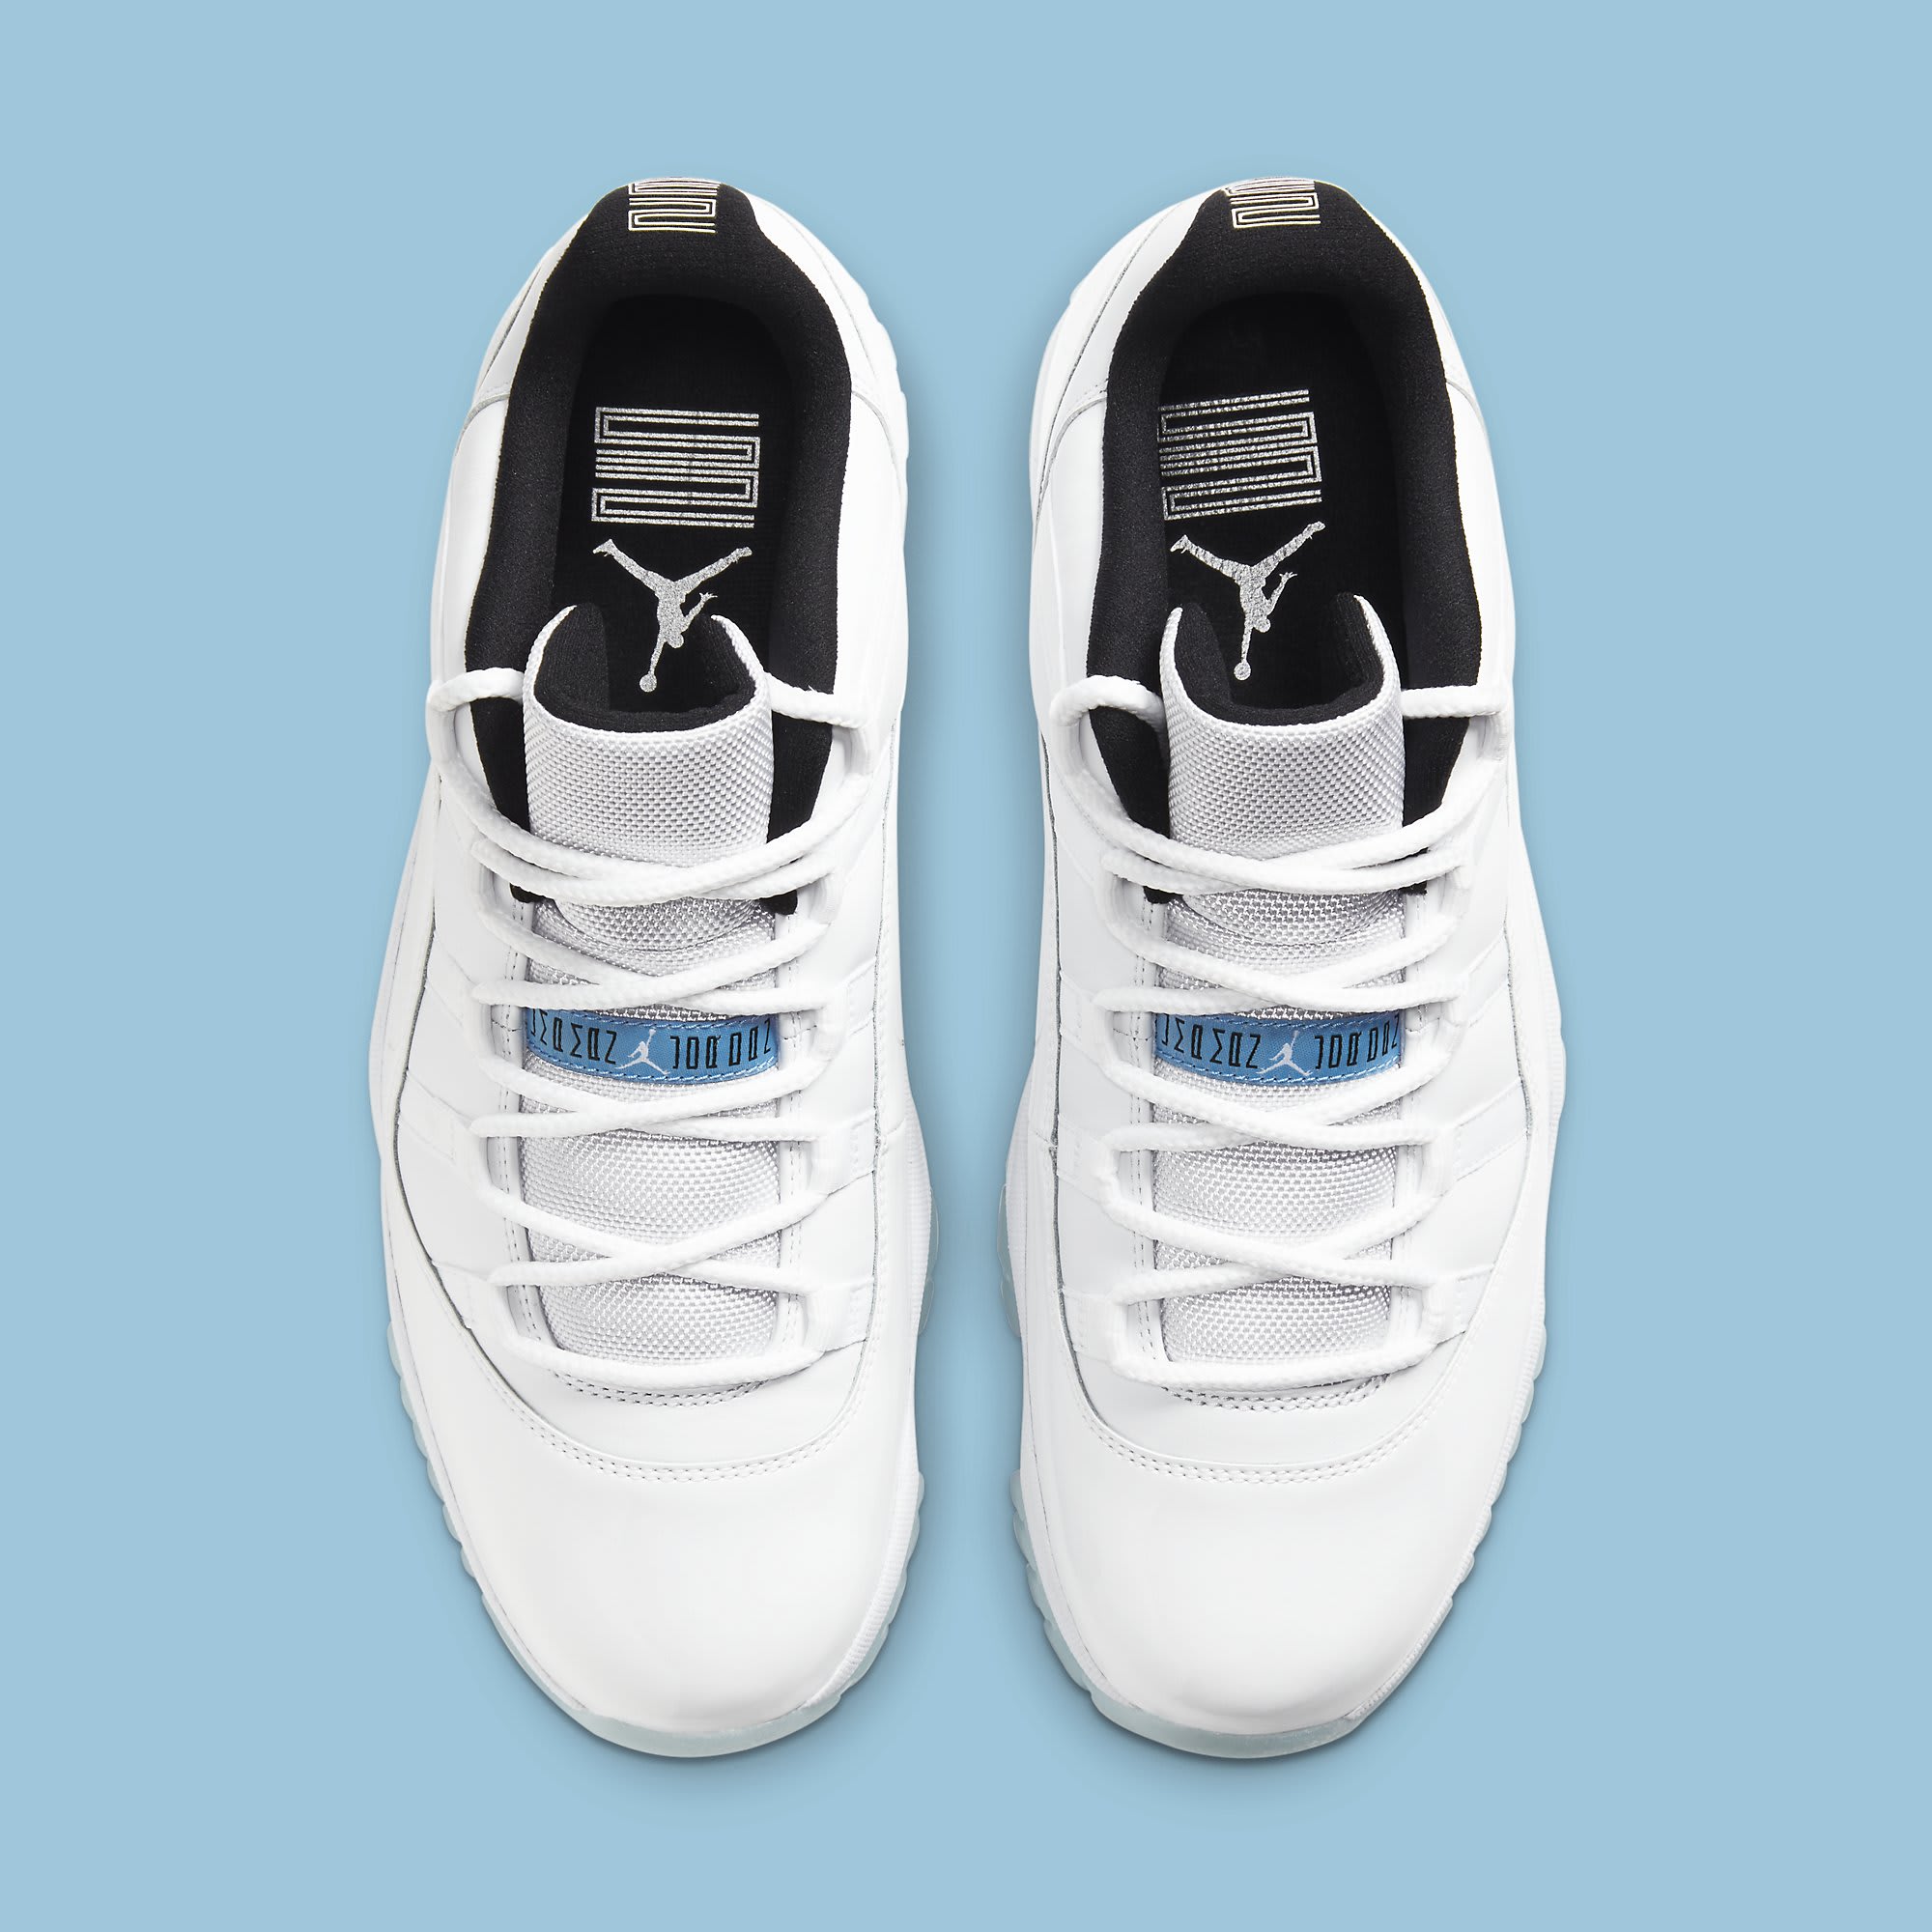 white and blue low top 11